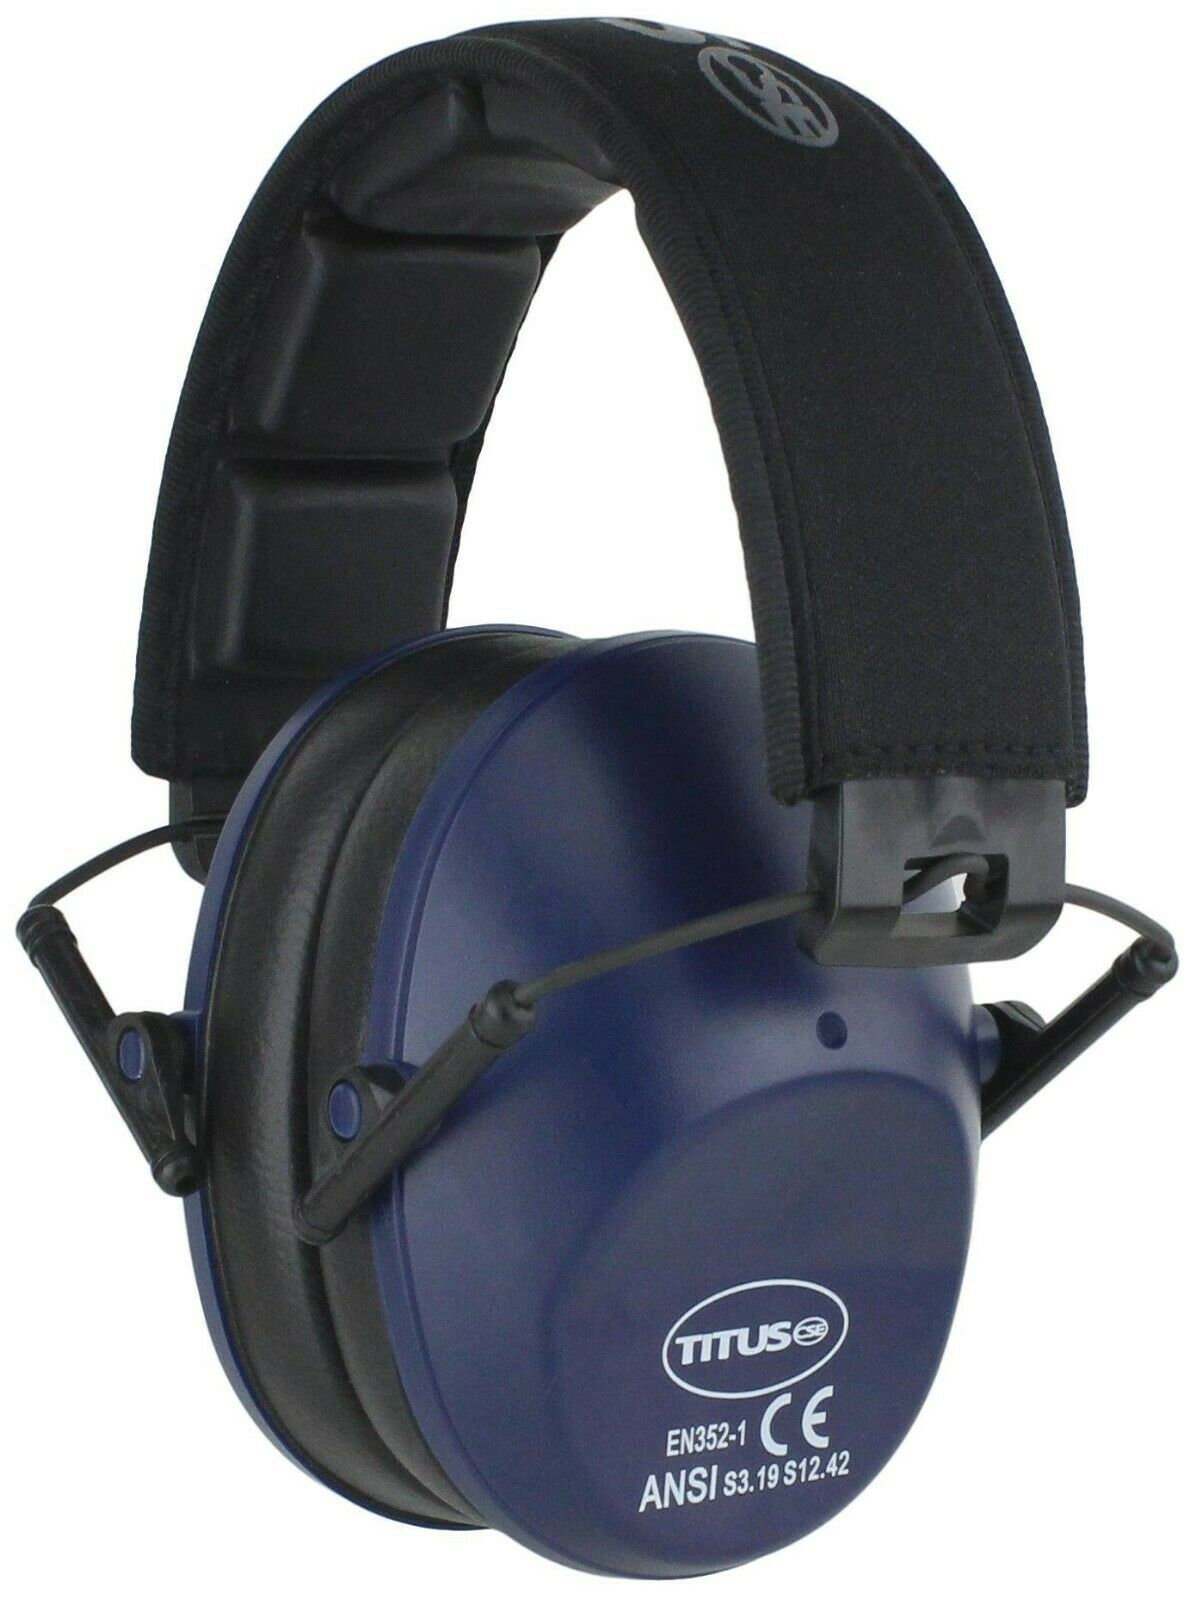 Titus Low Profile Ear Muffs 34 Nrr Range Hearing Protection Noise Reduction Ansi